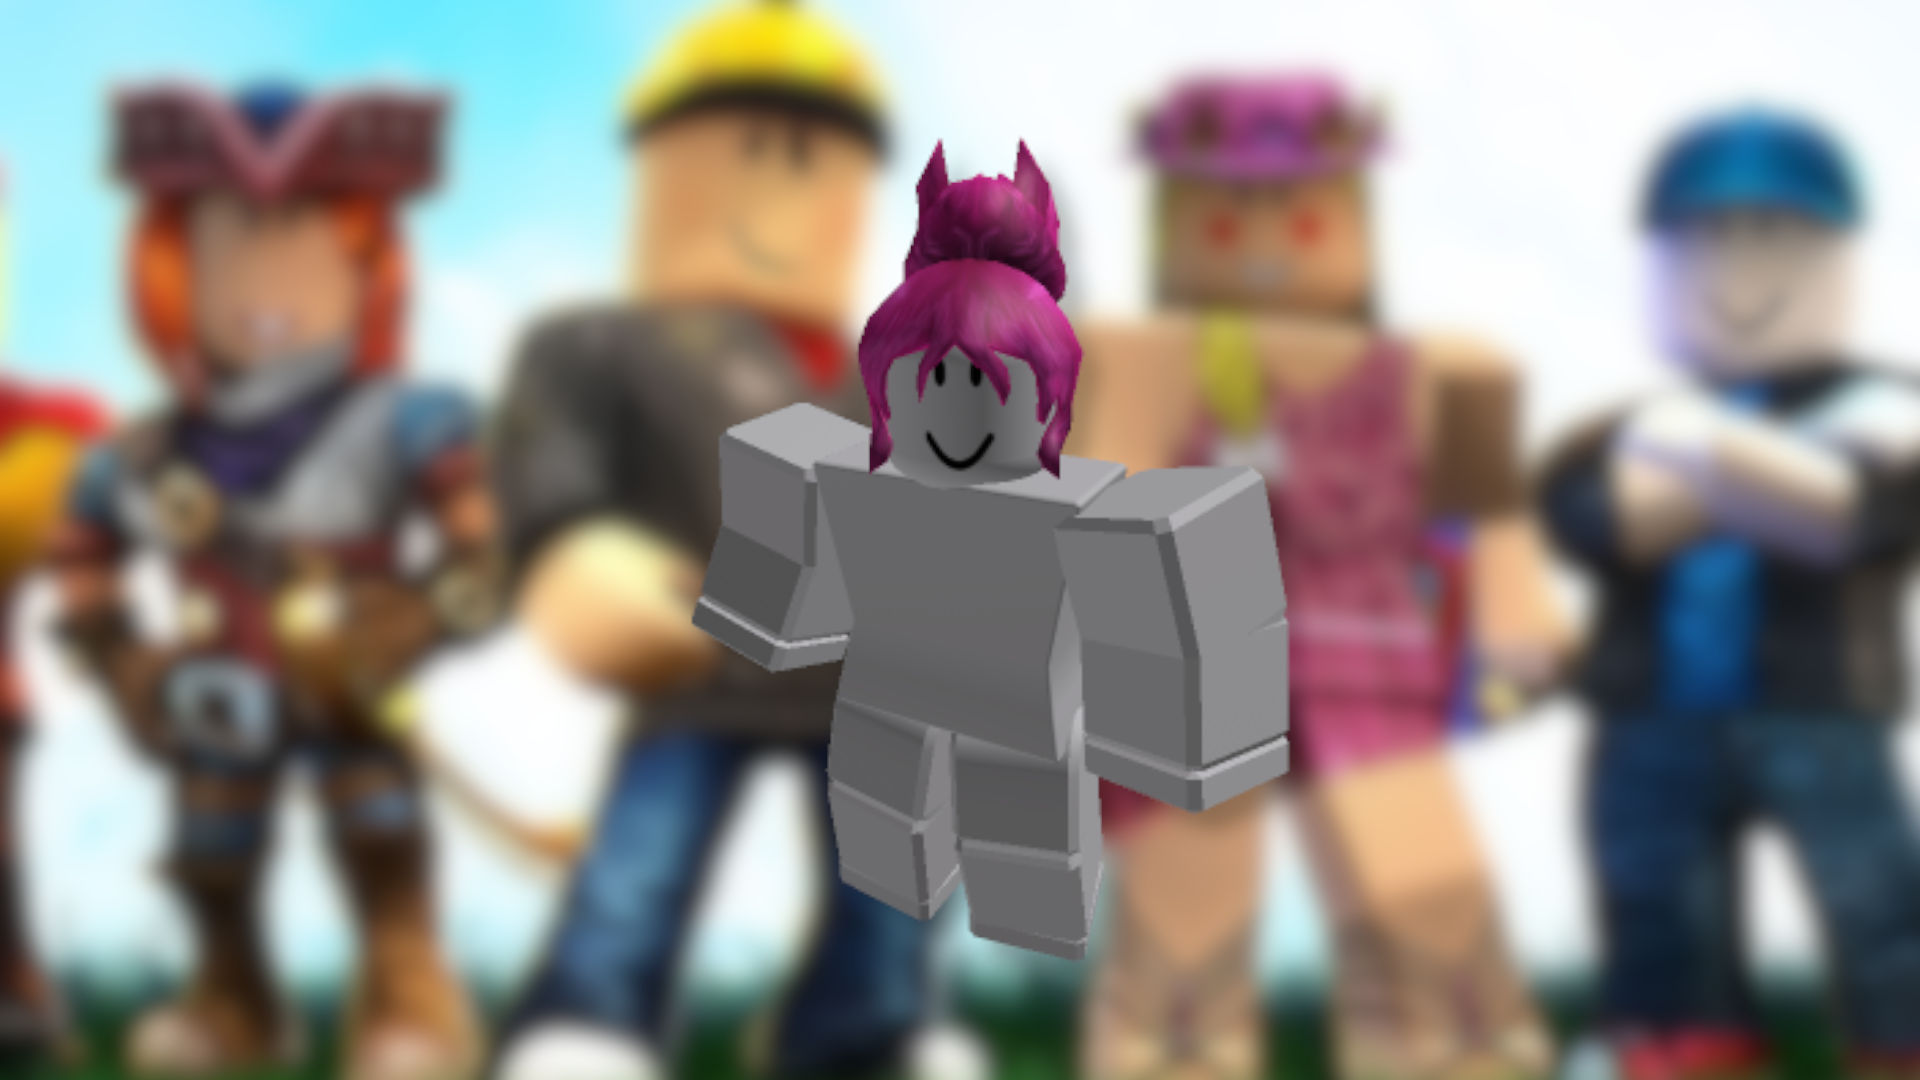 NEW* FREE HAIR ON ROBLOX! (2023) 